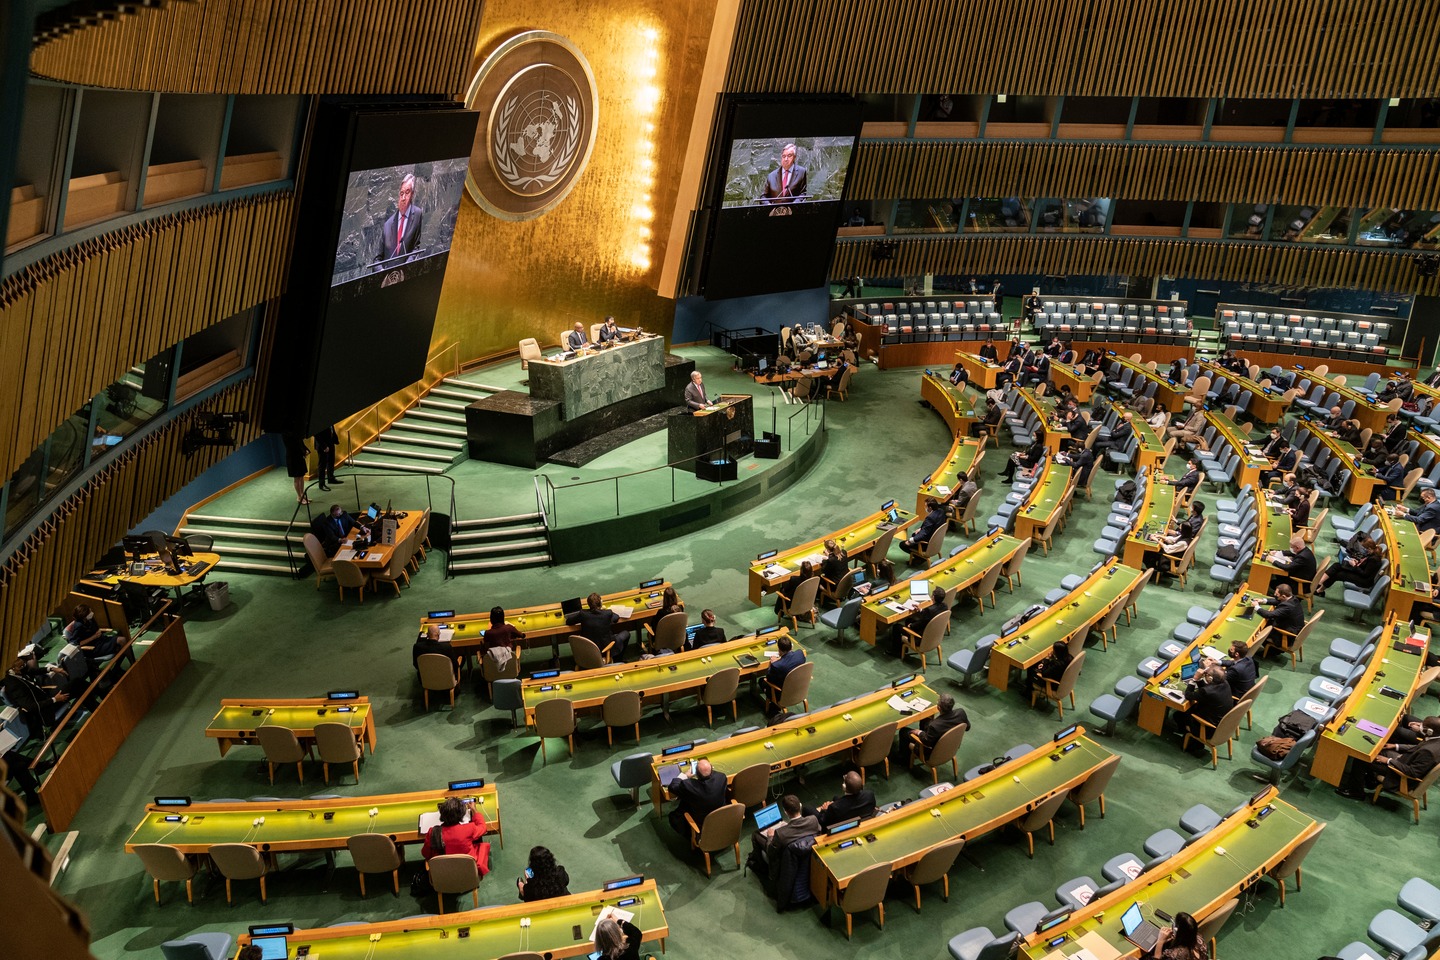 Could the UN be the power we need to apply ethics to artificial intelligence?